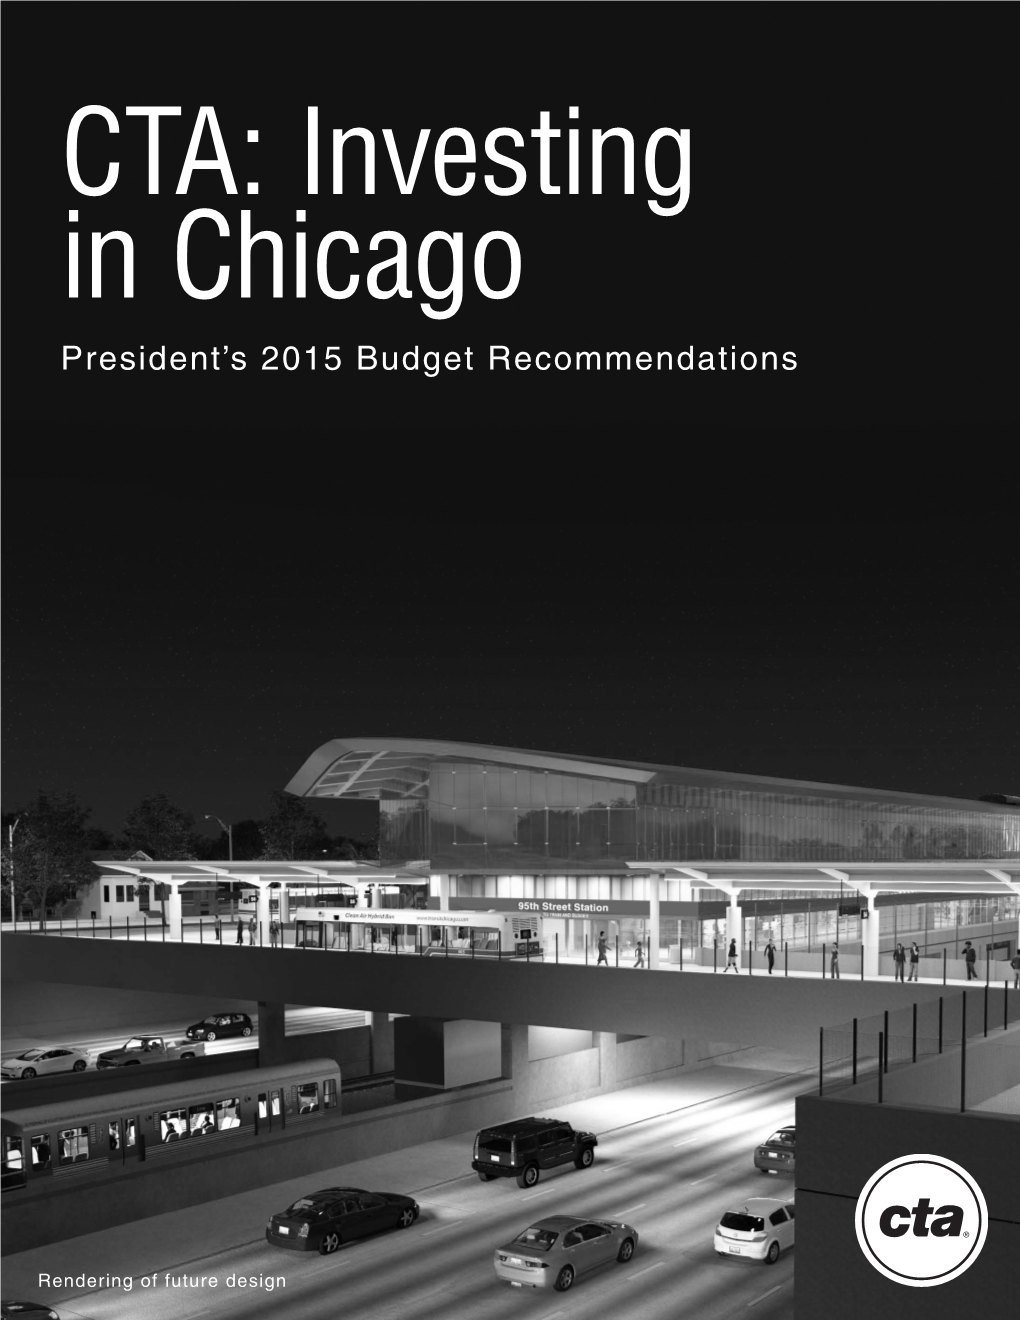 President's 2015 Budget Recommendations